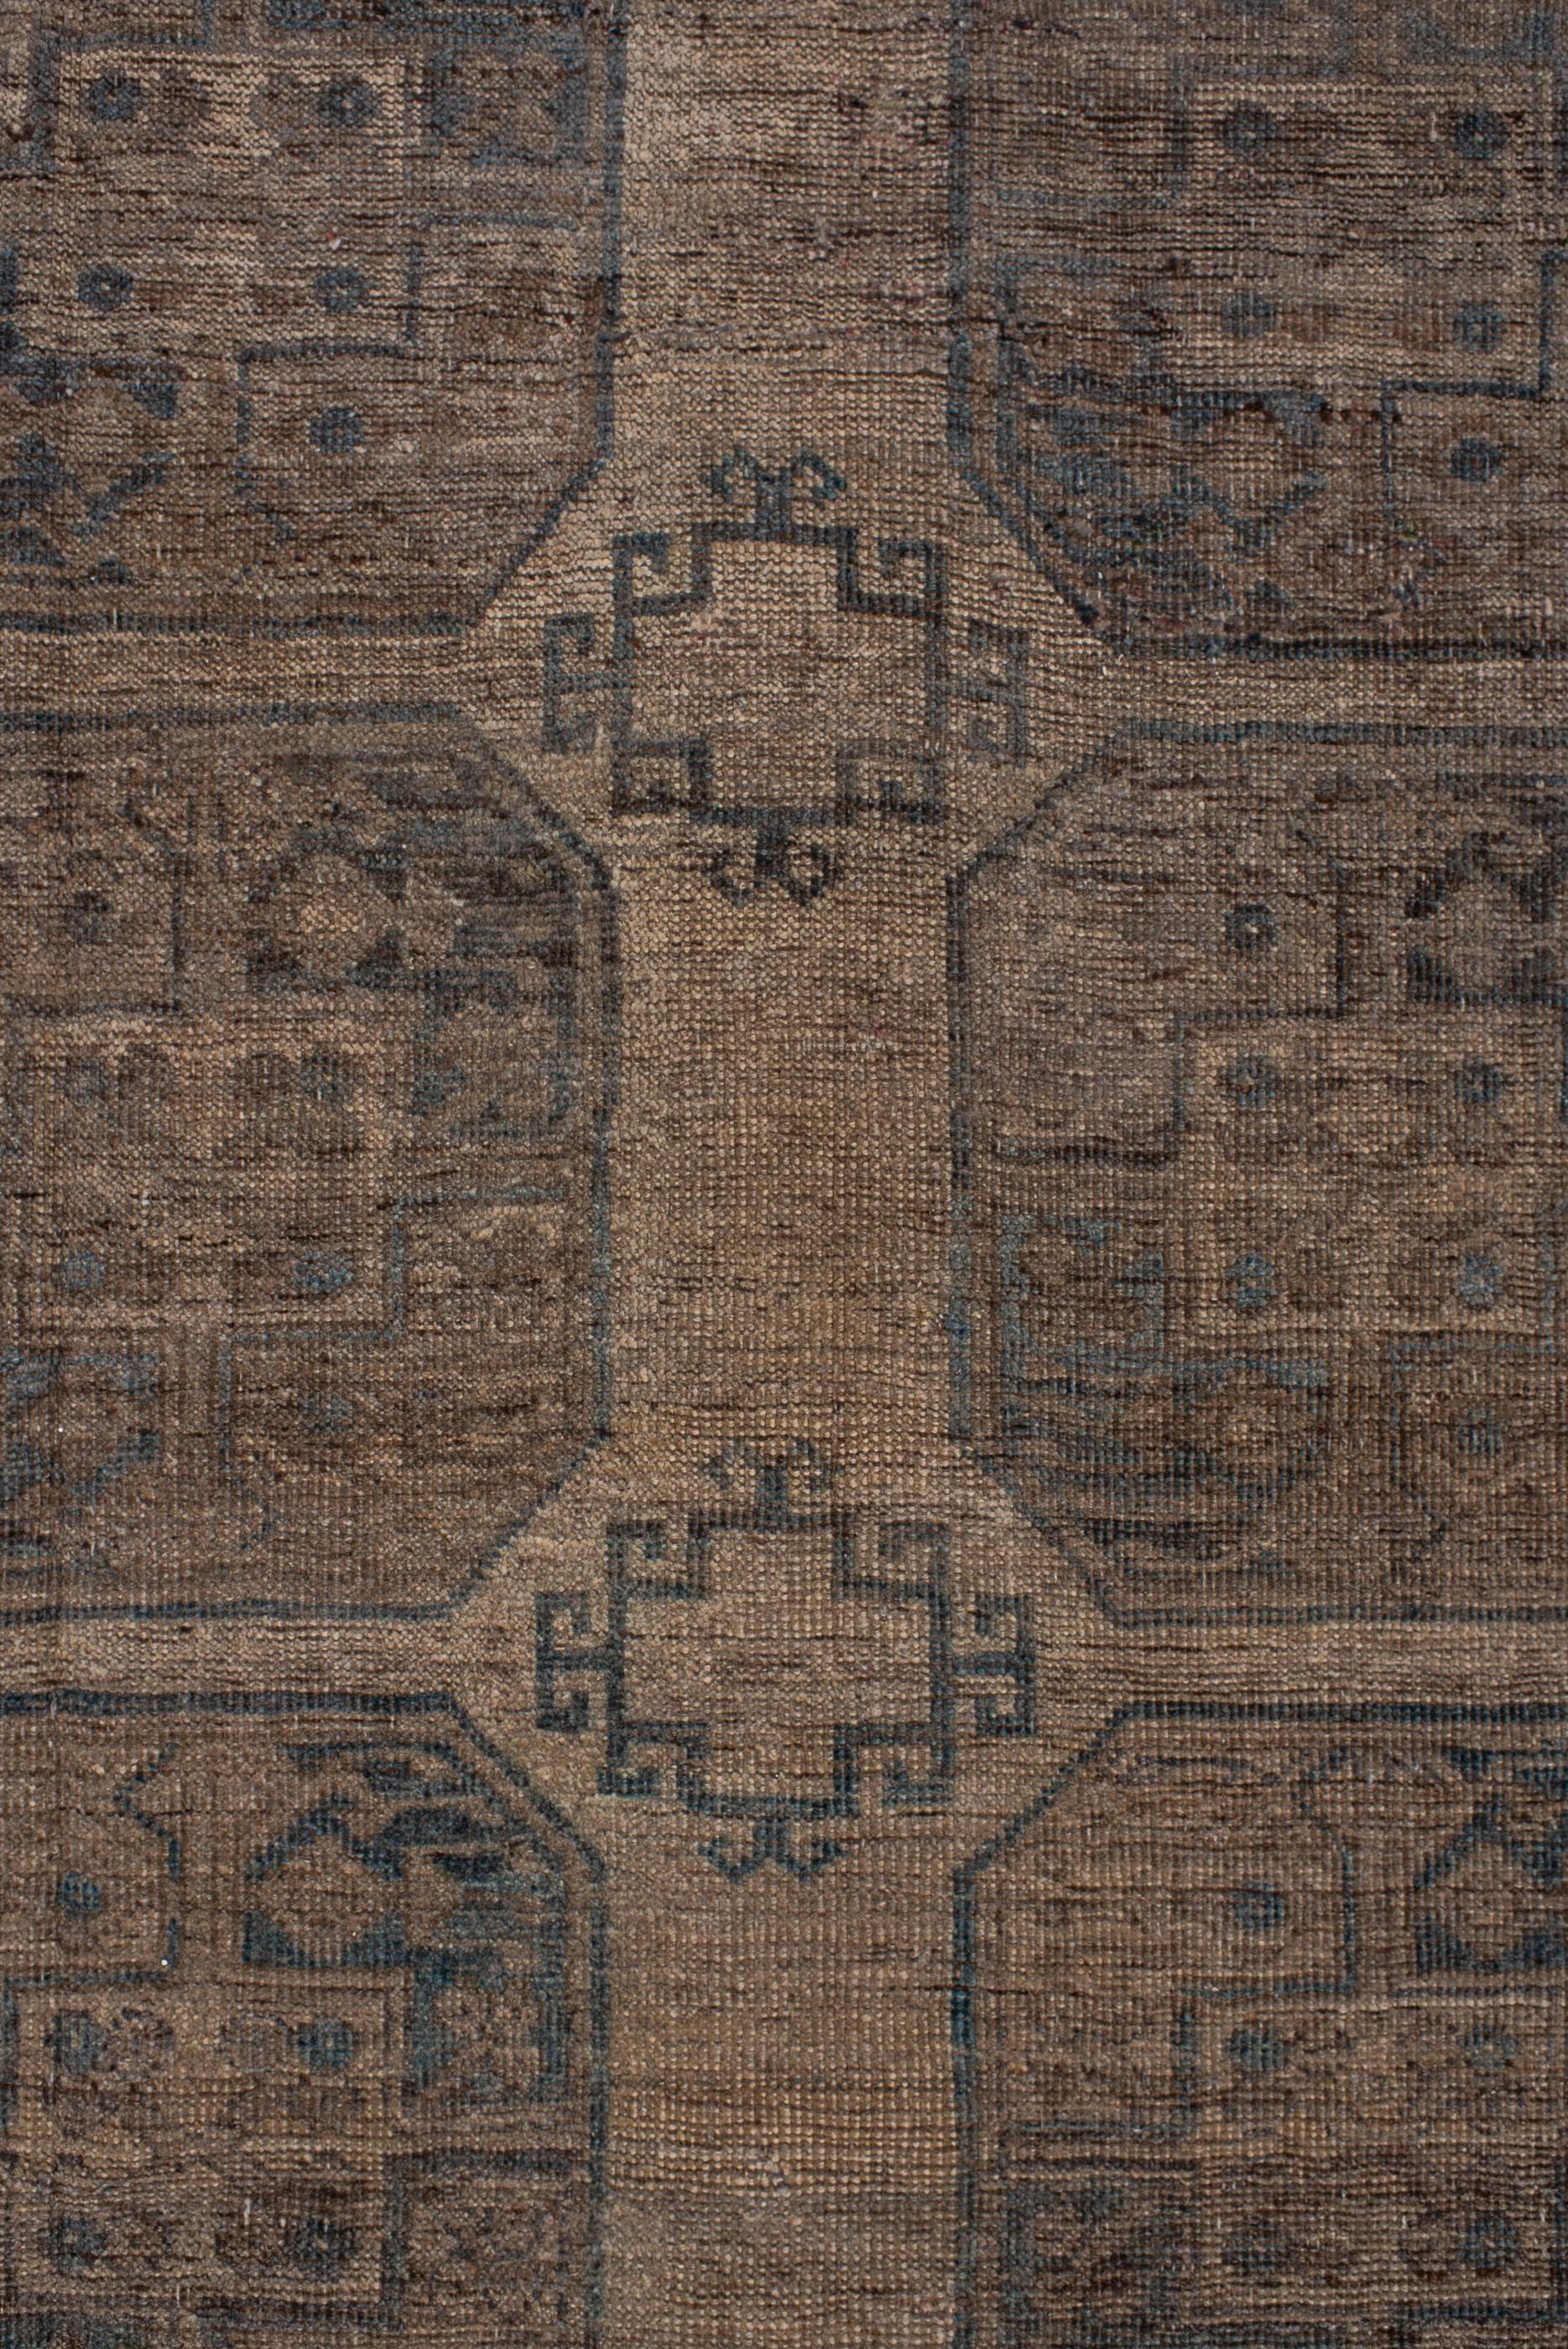 Antique Afghan Ersari Rug with Earth Tone Palette In Good Condition For Sale In New York, NY